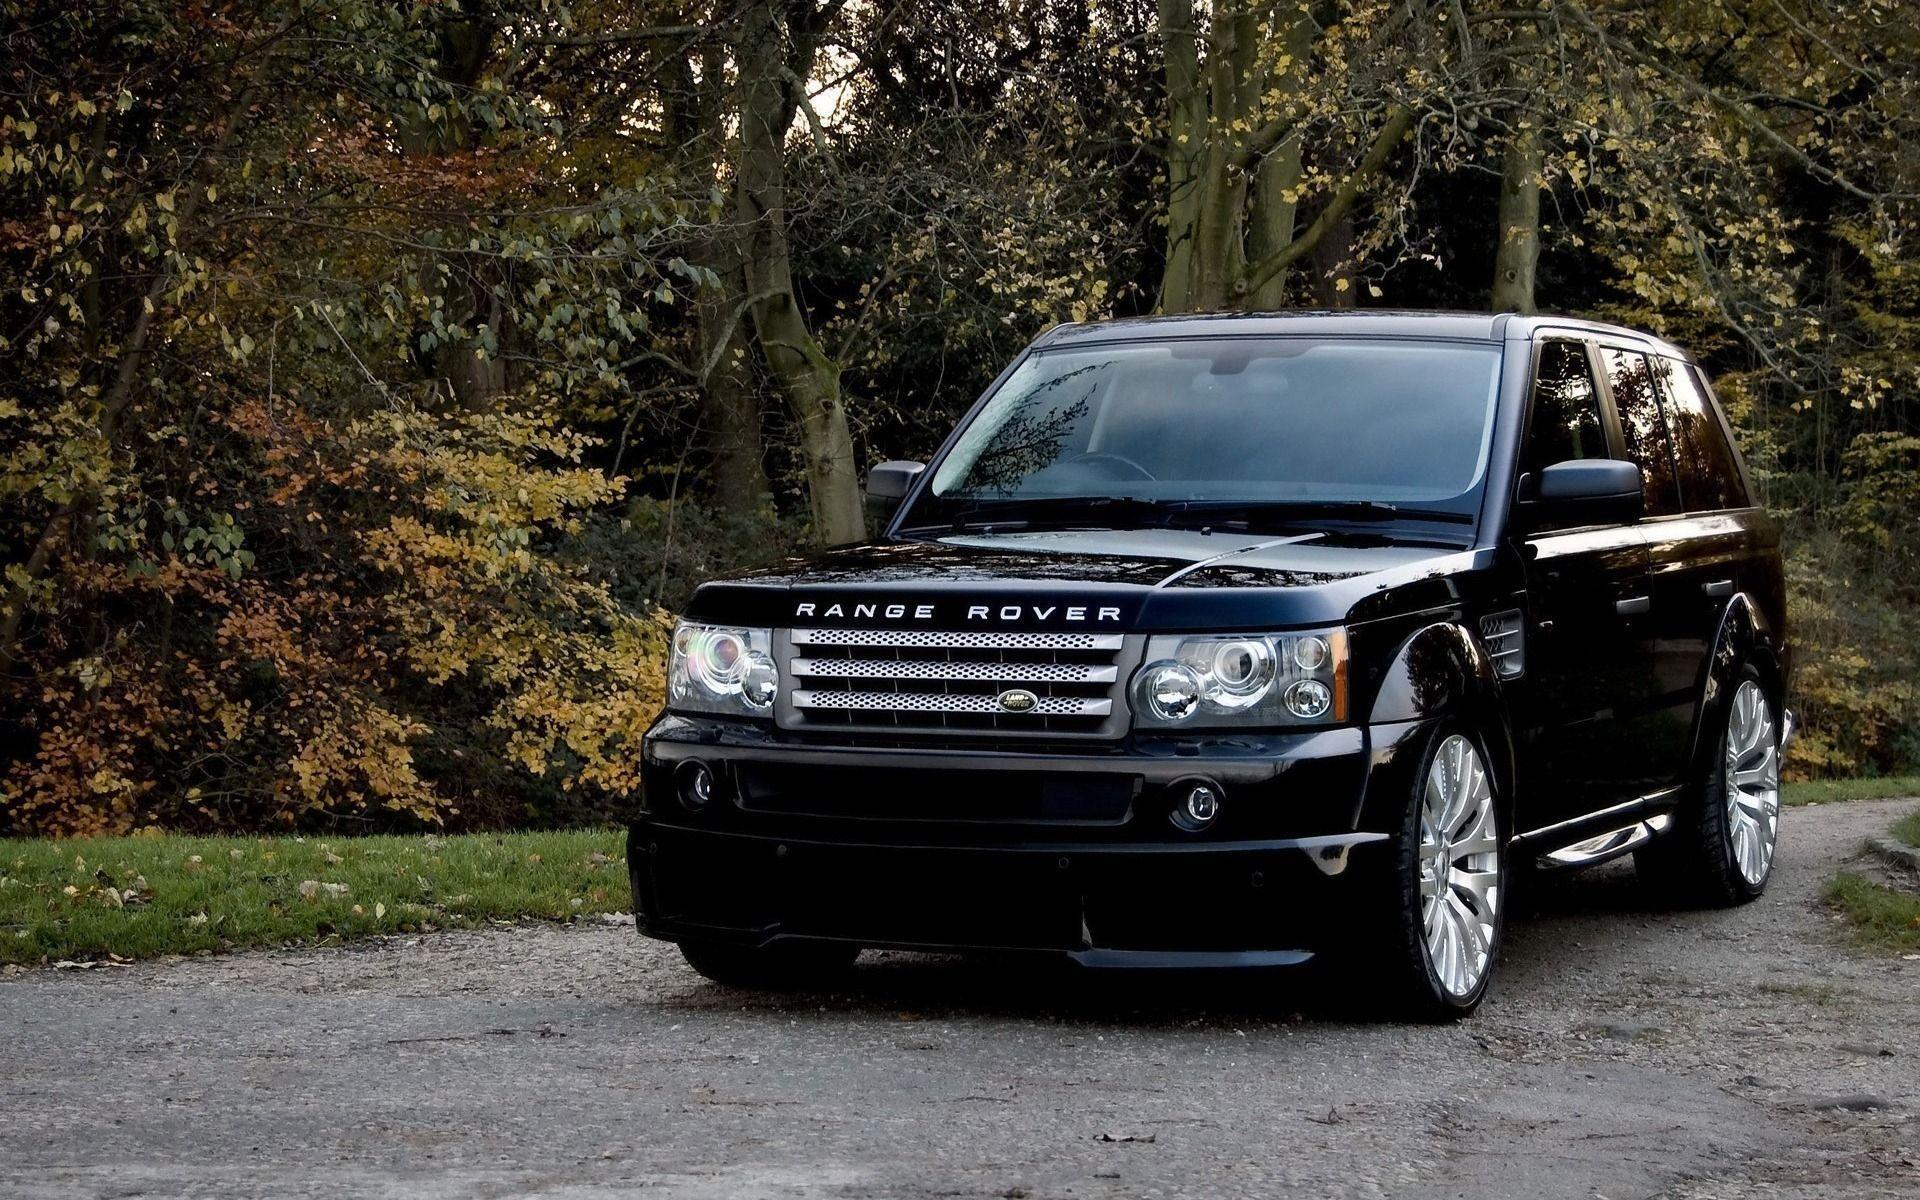 Range Rover Sport wallpaper and image, picture, photo